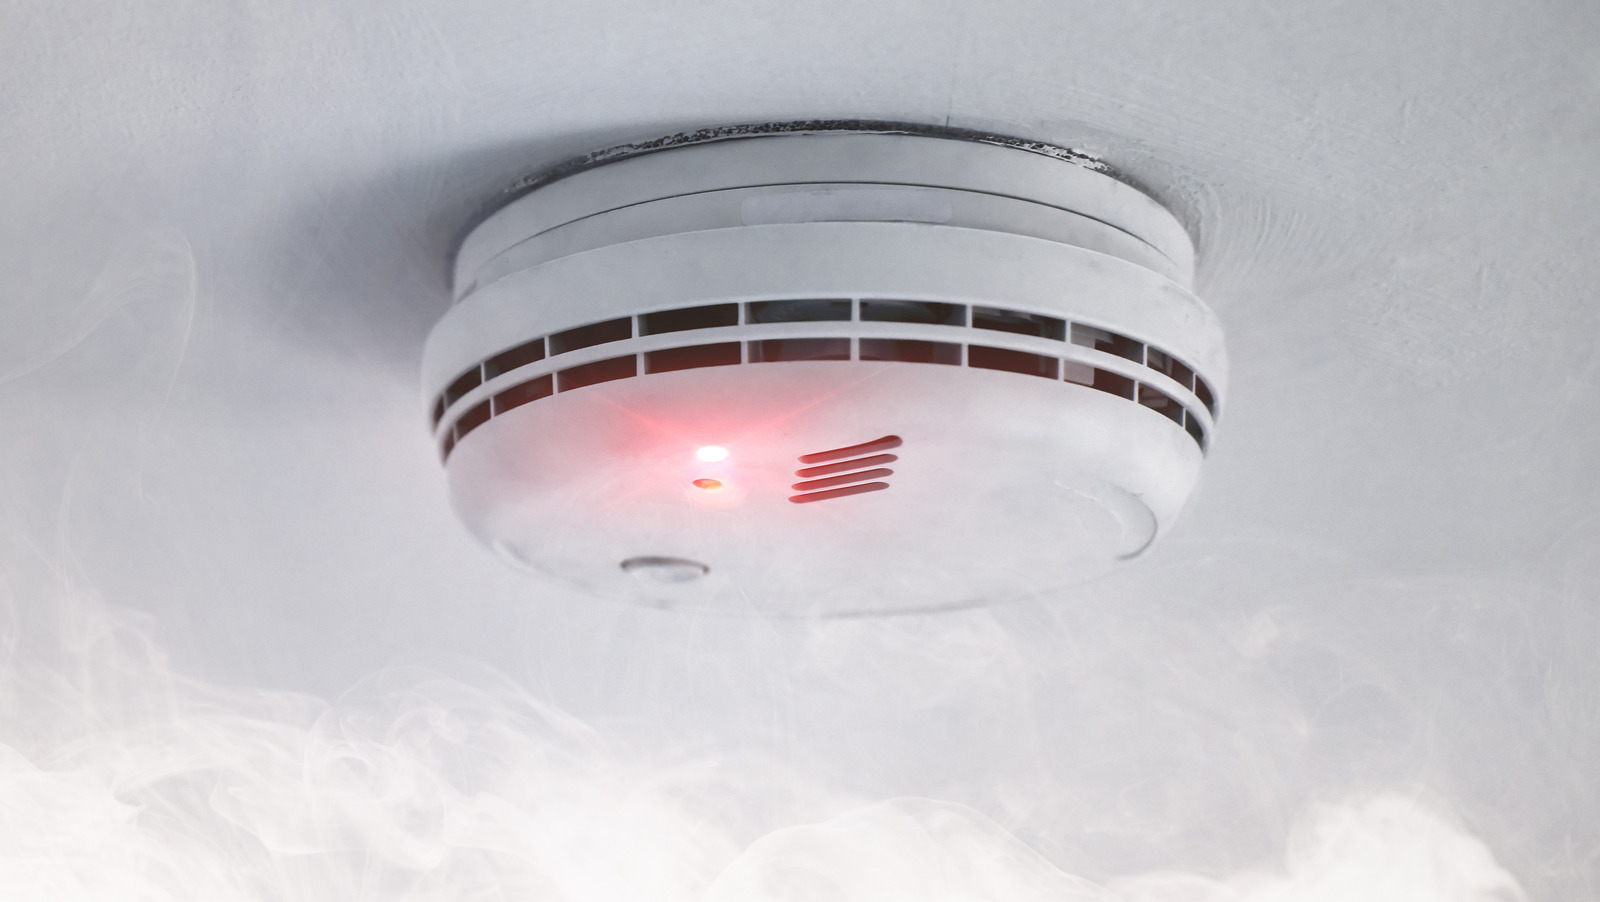 How to stop annoying smoke detector false alarms